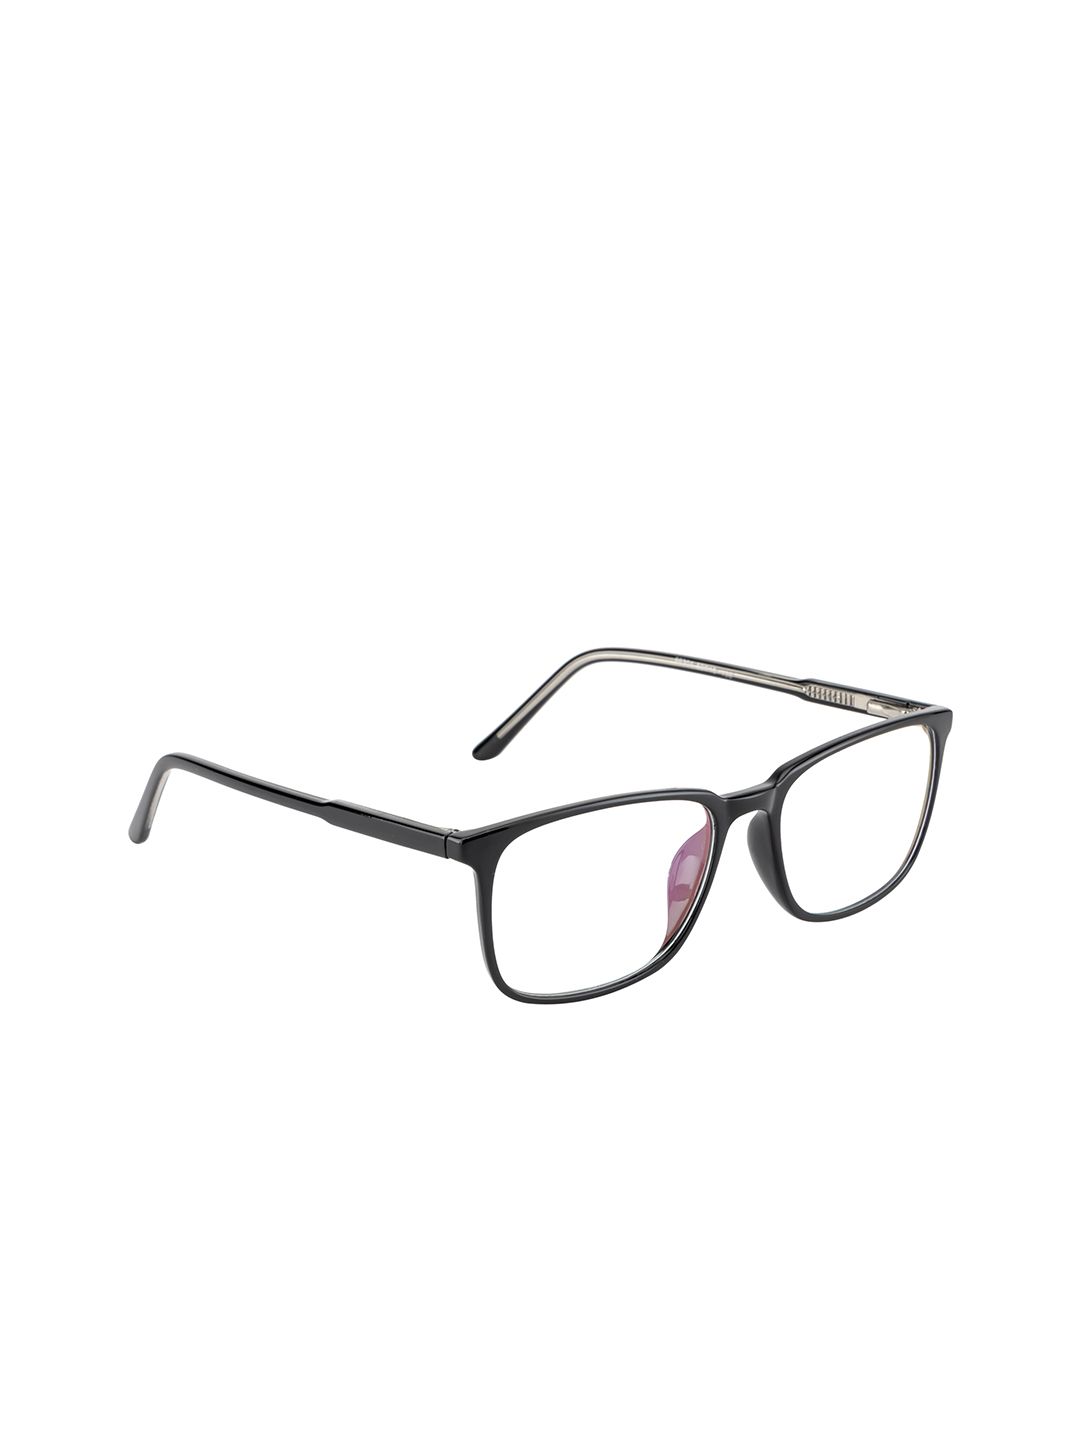 Ted Smith Unisex Black Solid Full Rim Rectangle Frames TS-86301_BLK Price in India